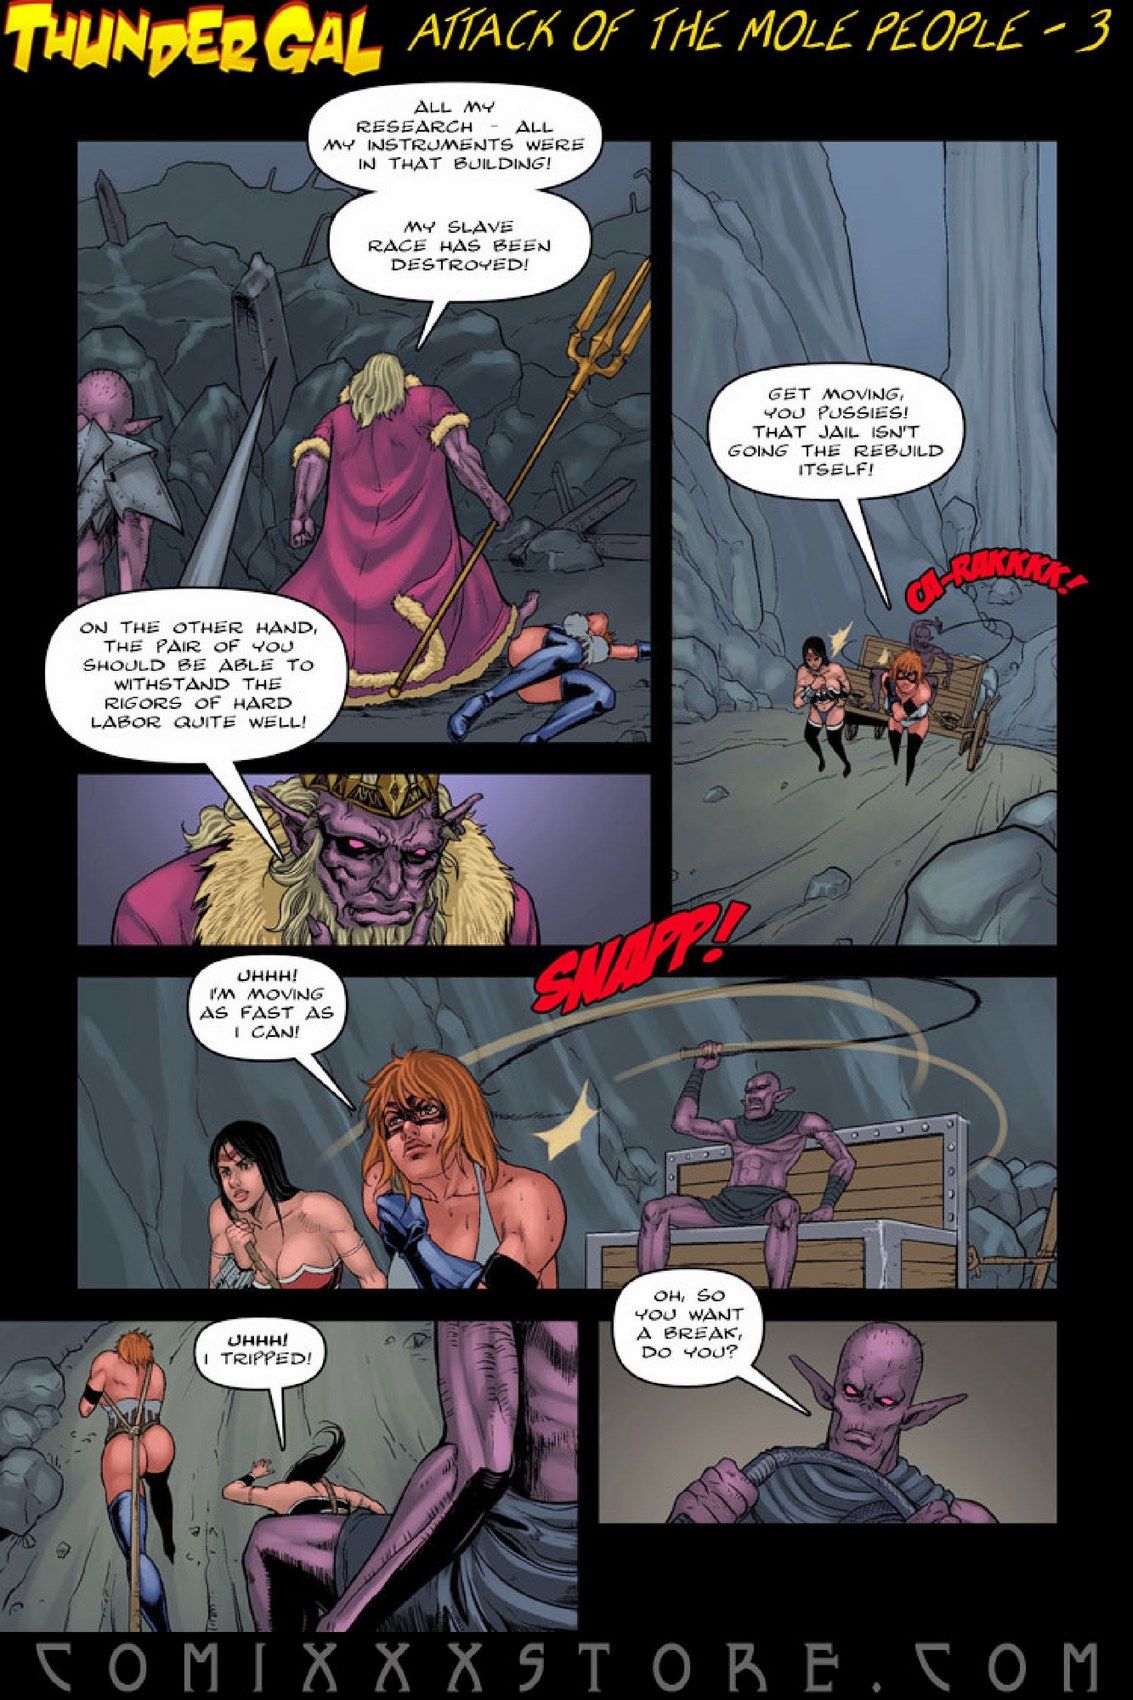 Attack of the Mole People 3 Thunder Gal (9 Superheroines) page 19